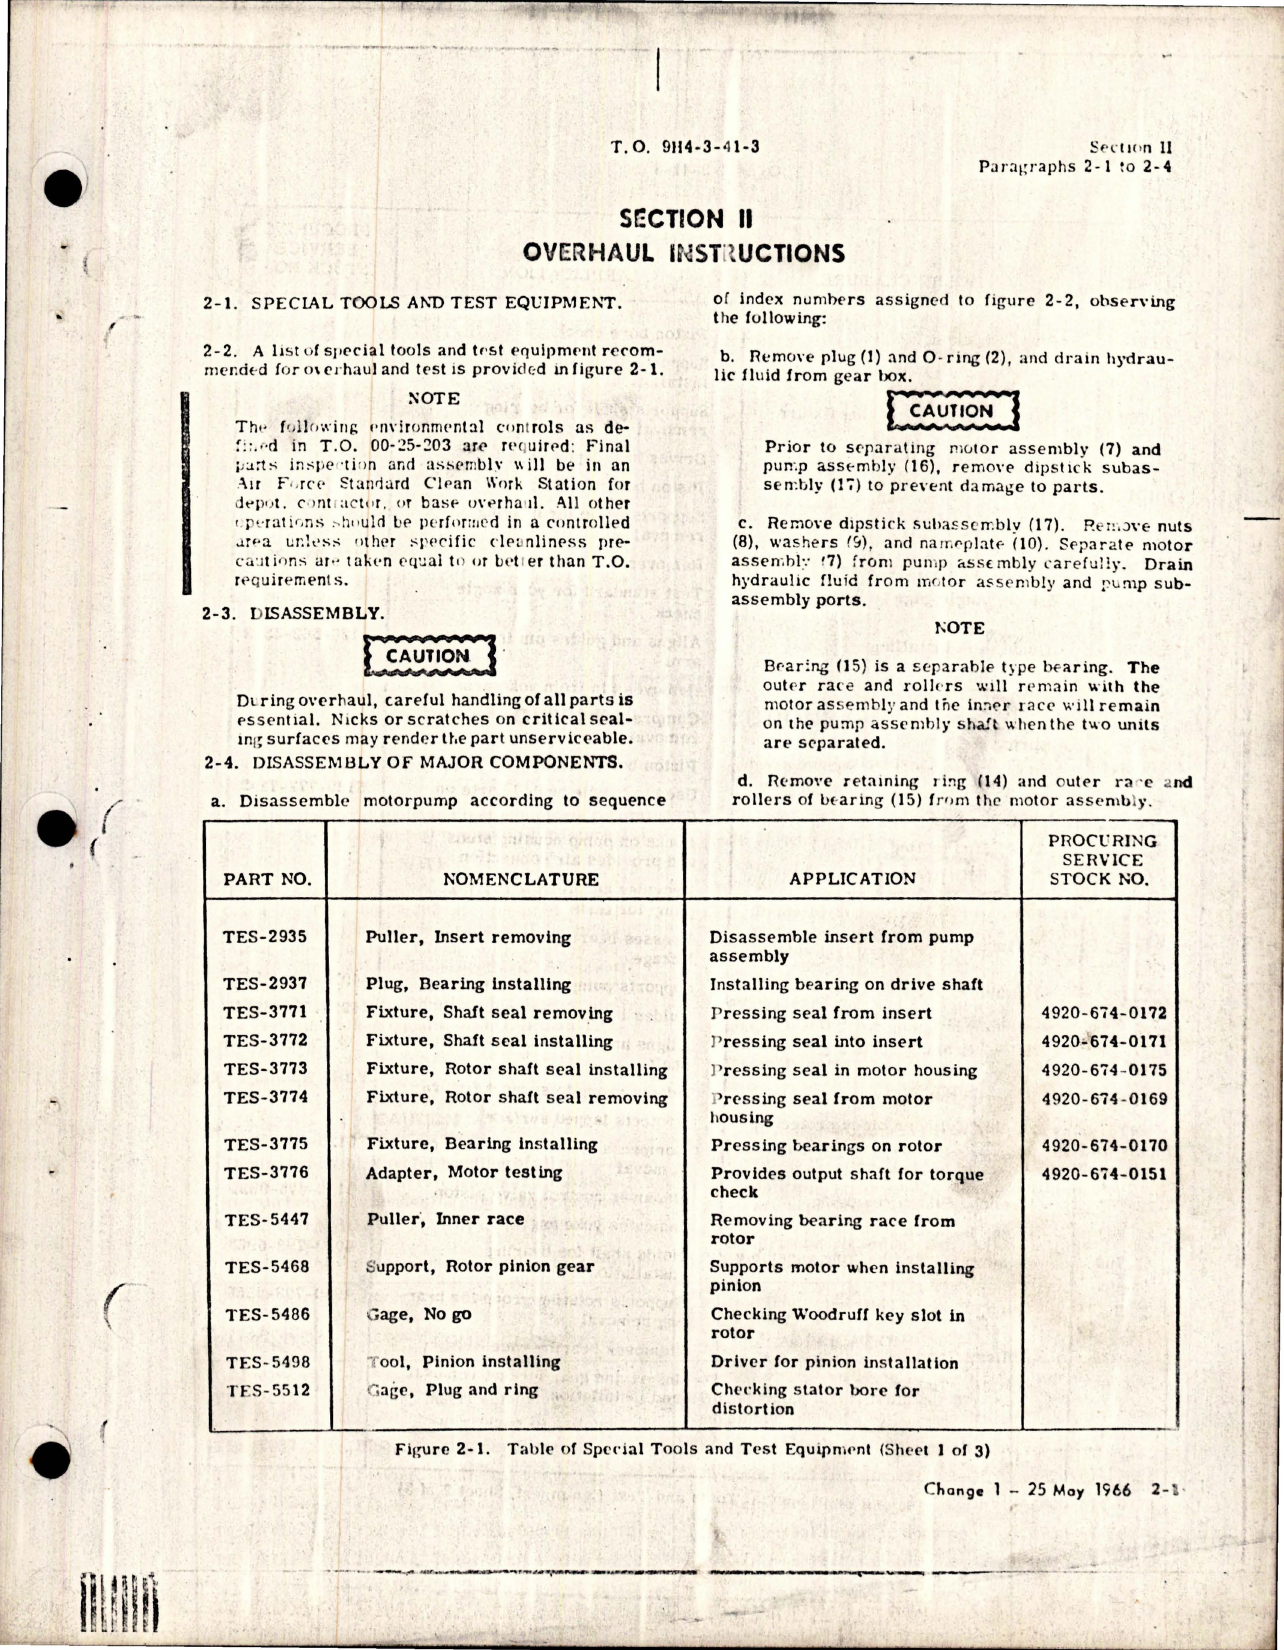 Sample page 7 from AirCorps Library document: Overhaul Instructions for Electrically Driven Hydraulic Motorpump - Change No. 3 